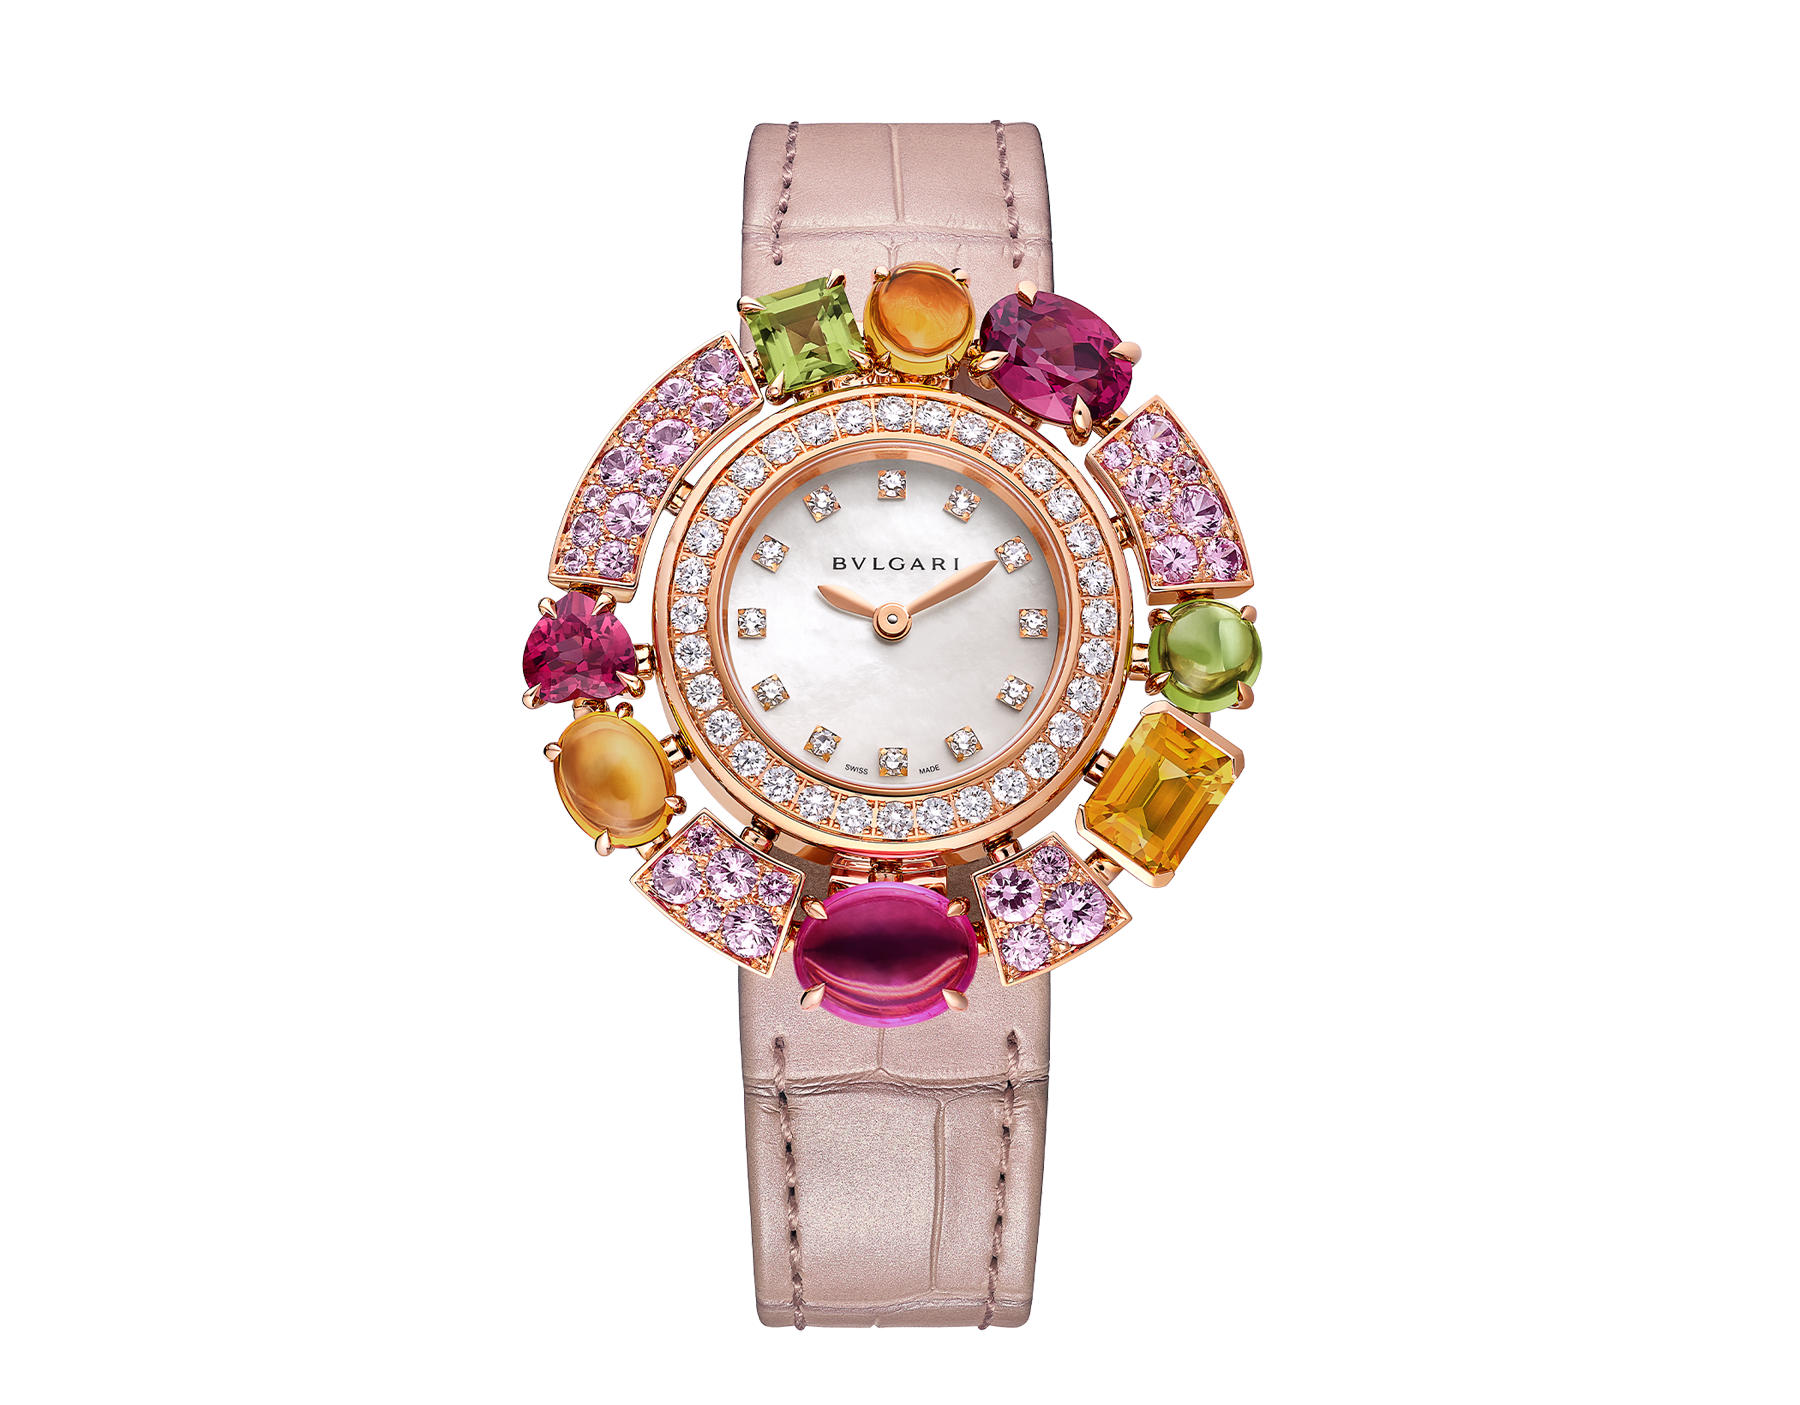 Allegra watch with 18 kt rose gold case set with brilliant-cut diamonds and 32 pink sapphires, 1 pink tourmaline, 3 citrines, 2 dark pink rhodolite and 2 peridots, mother-of-pearl dial, 12 diamond indexes and light pink iridescent alligator bracelet. Water resistant up to 30 metres 103713 image 1